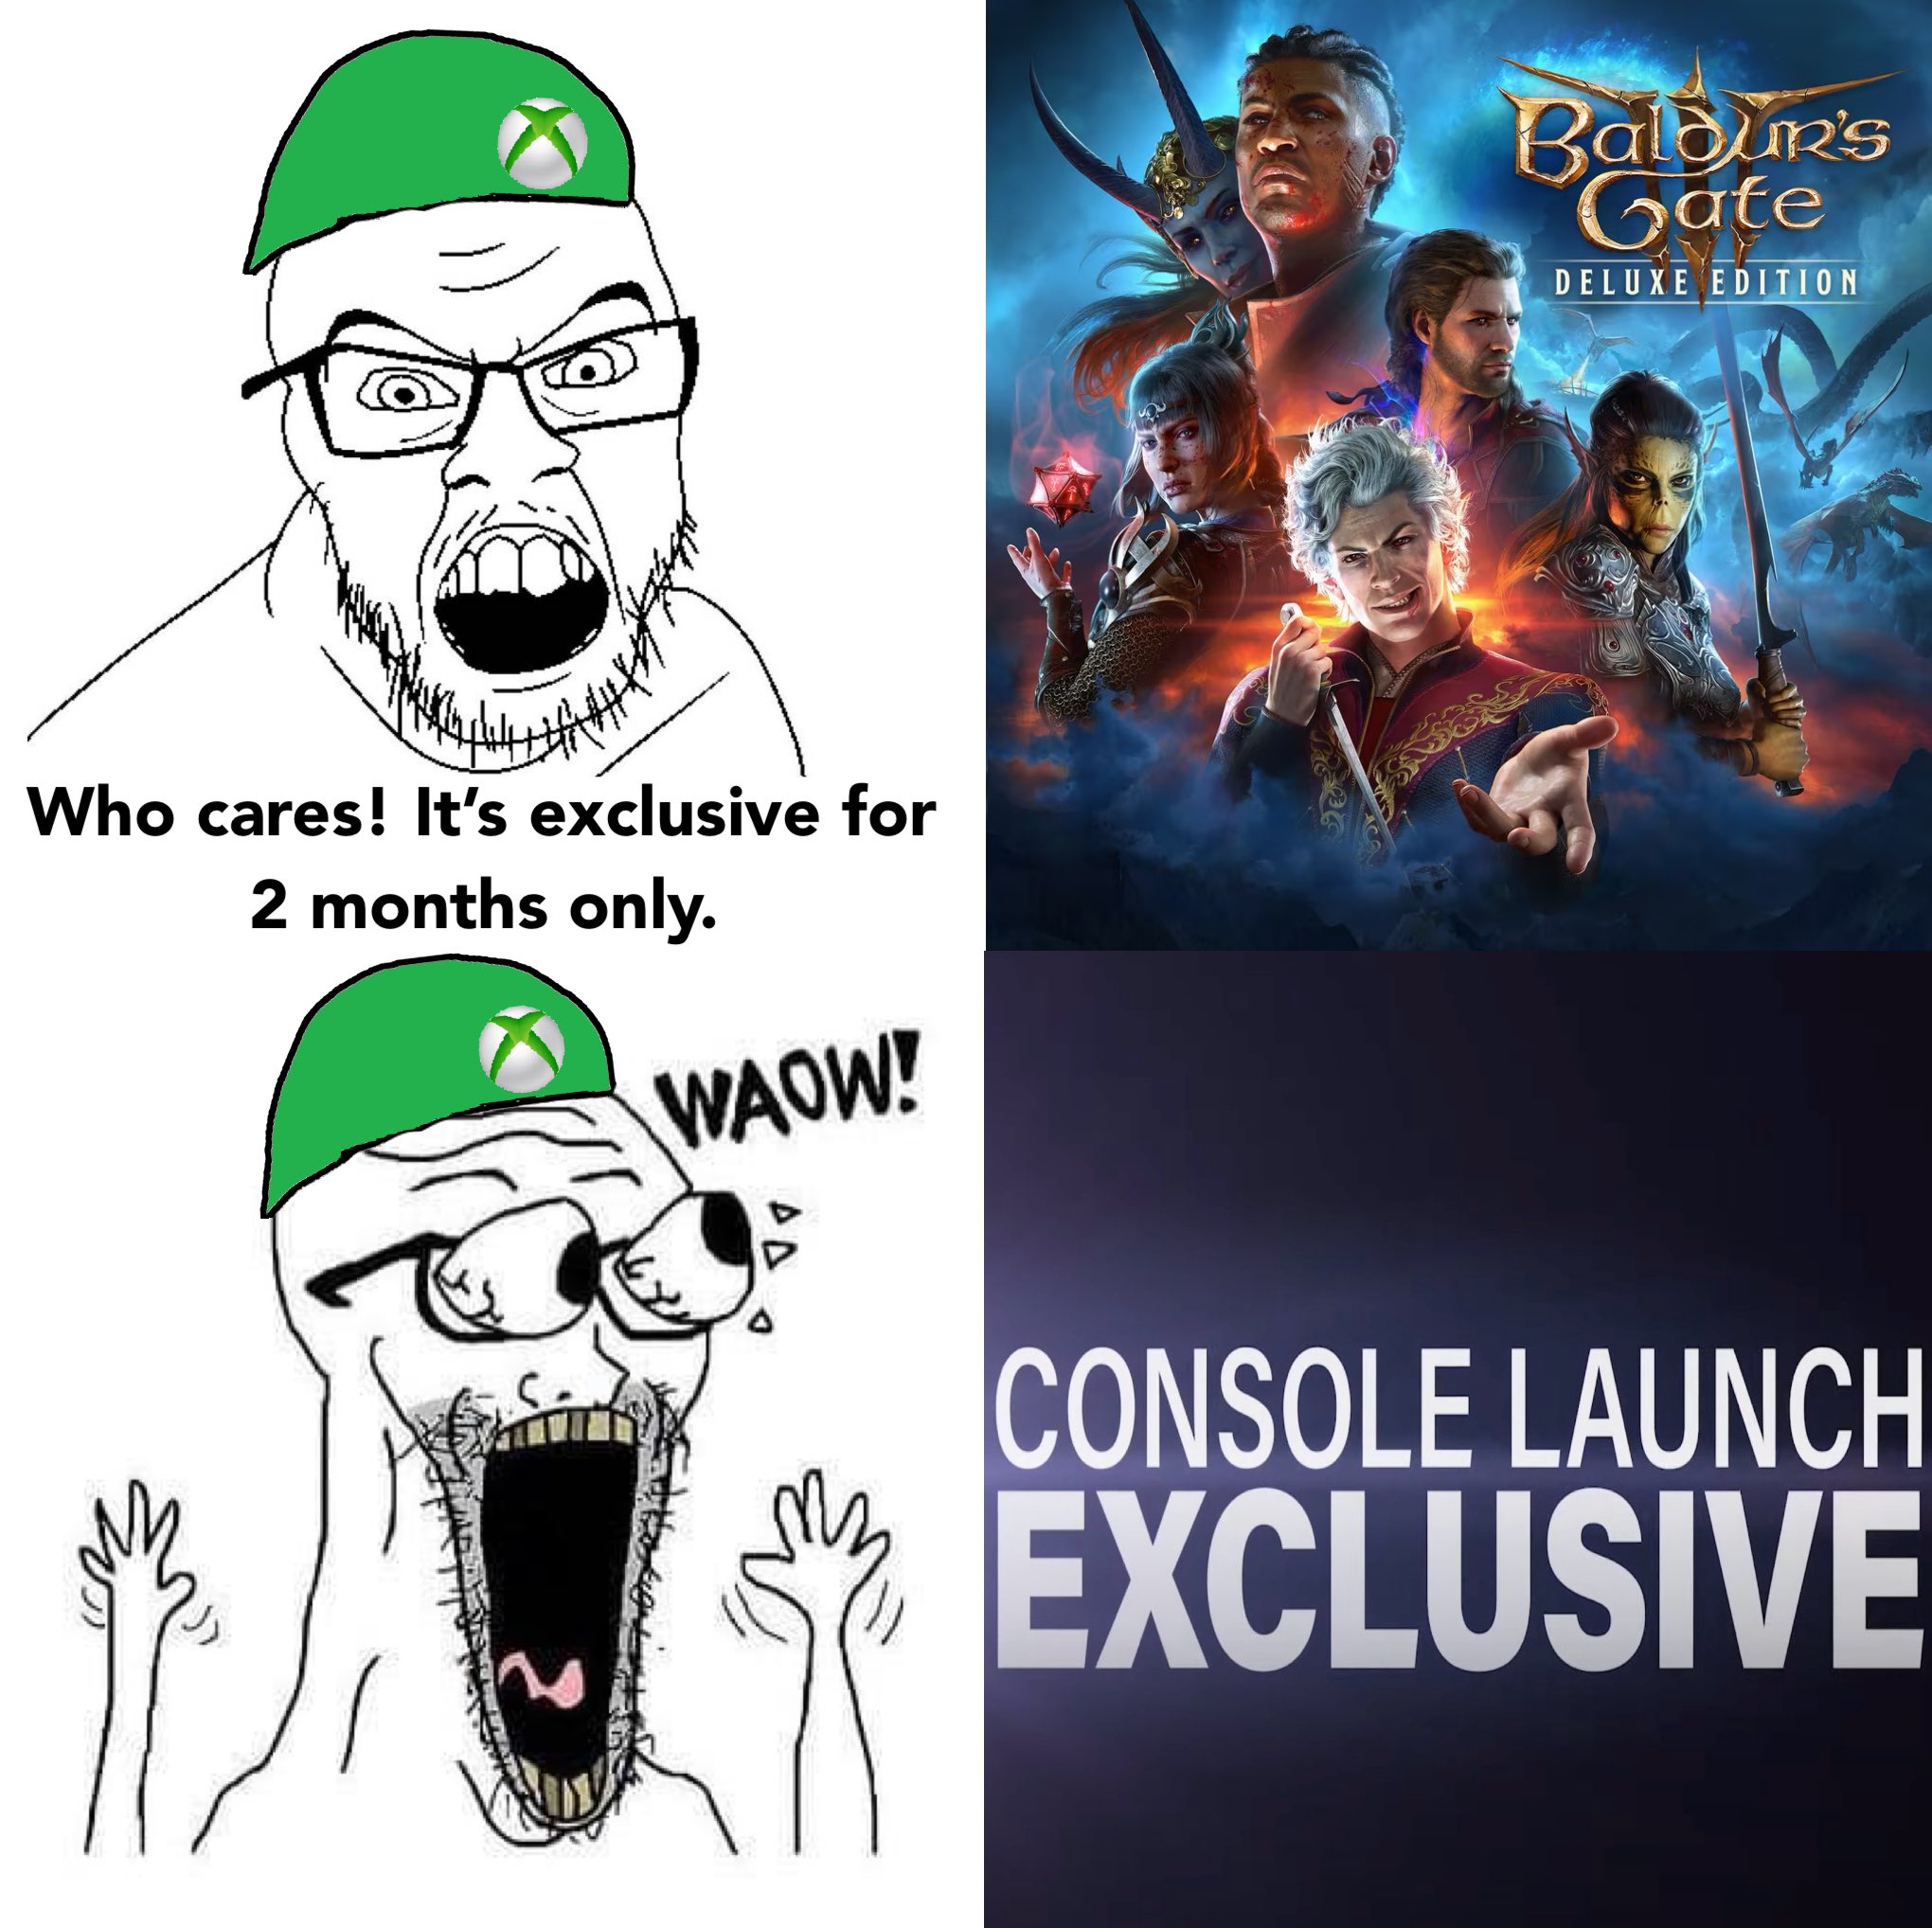 UNLeashed on X: Excitement for Timed Exclusives. Xbox fanboys, We